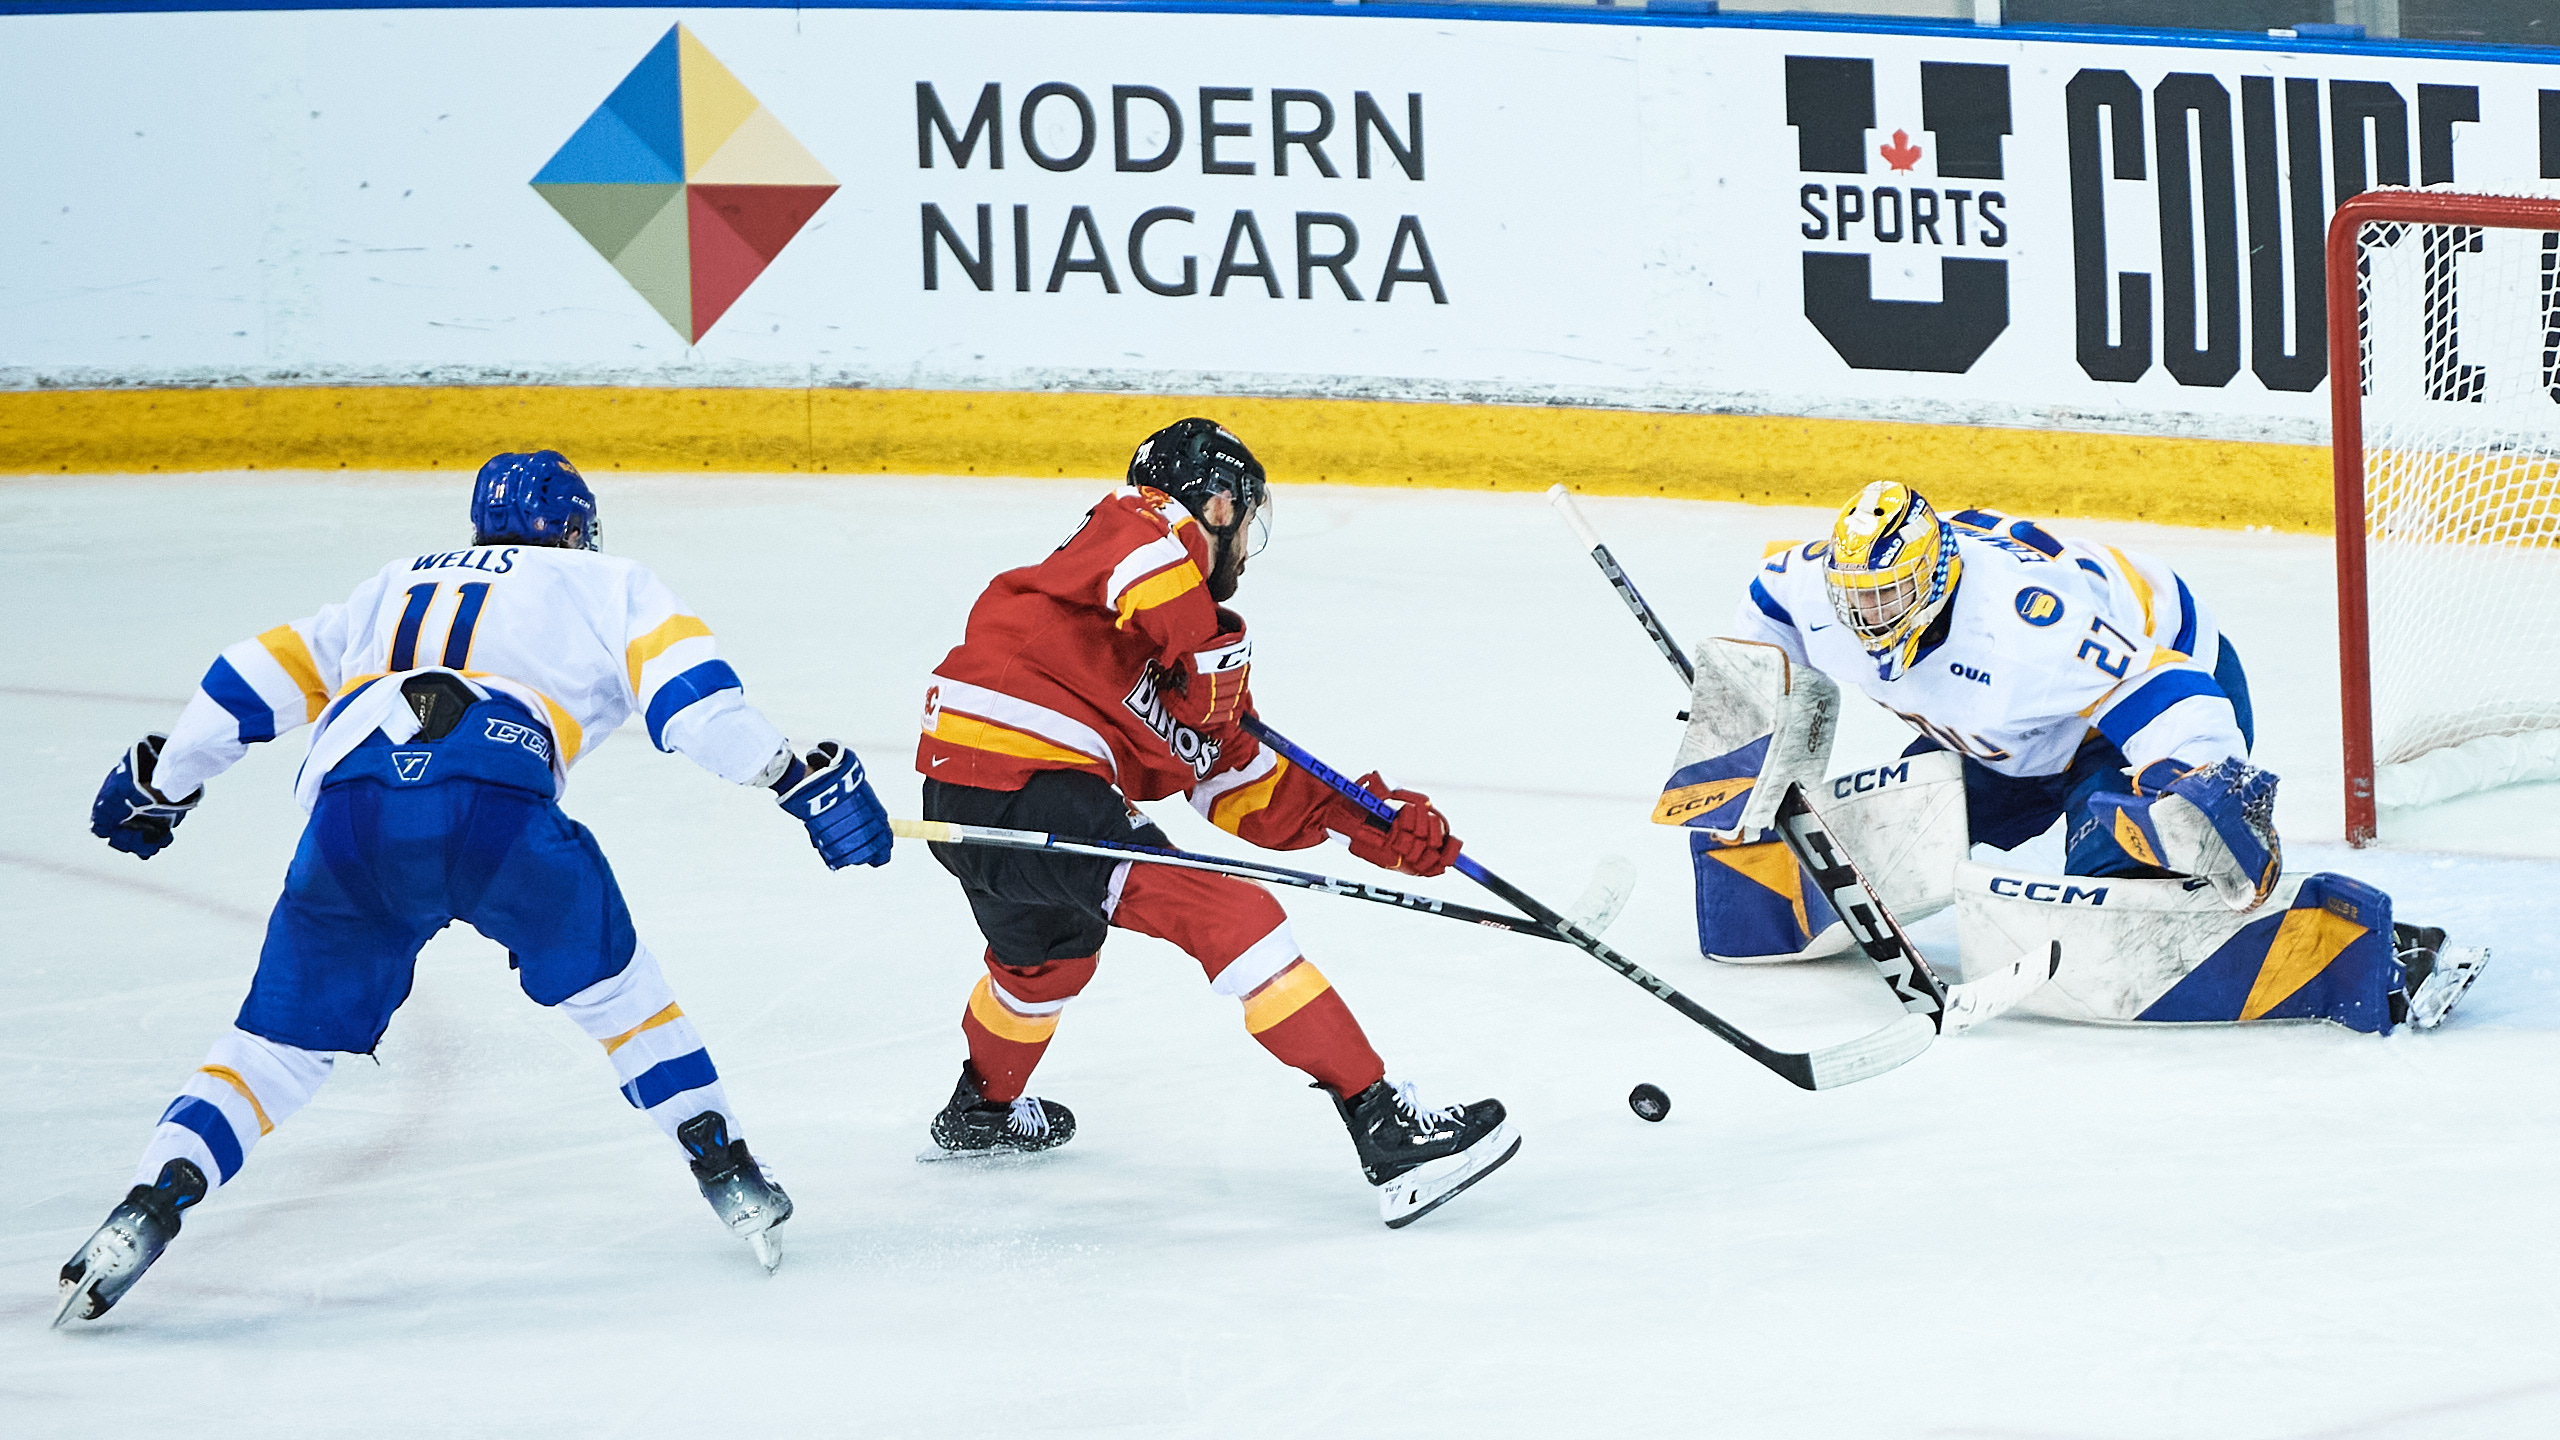 A Calgary player skates with the puck towards the TMU net